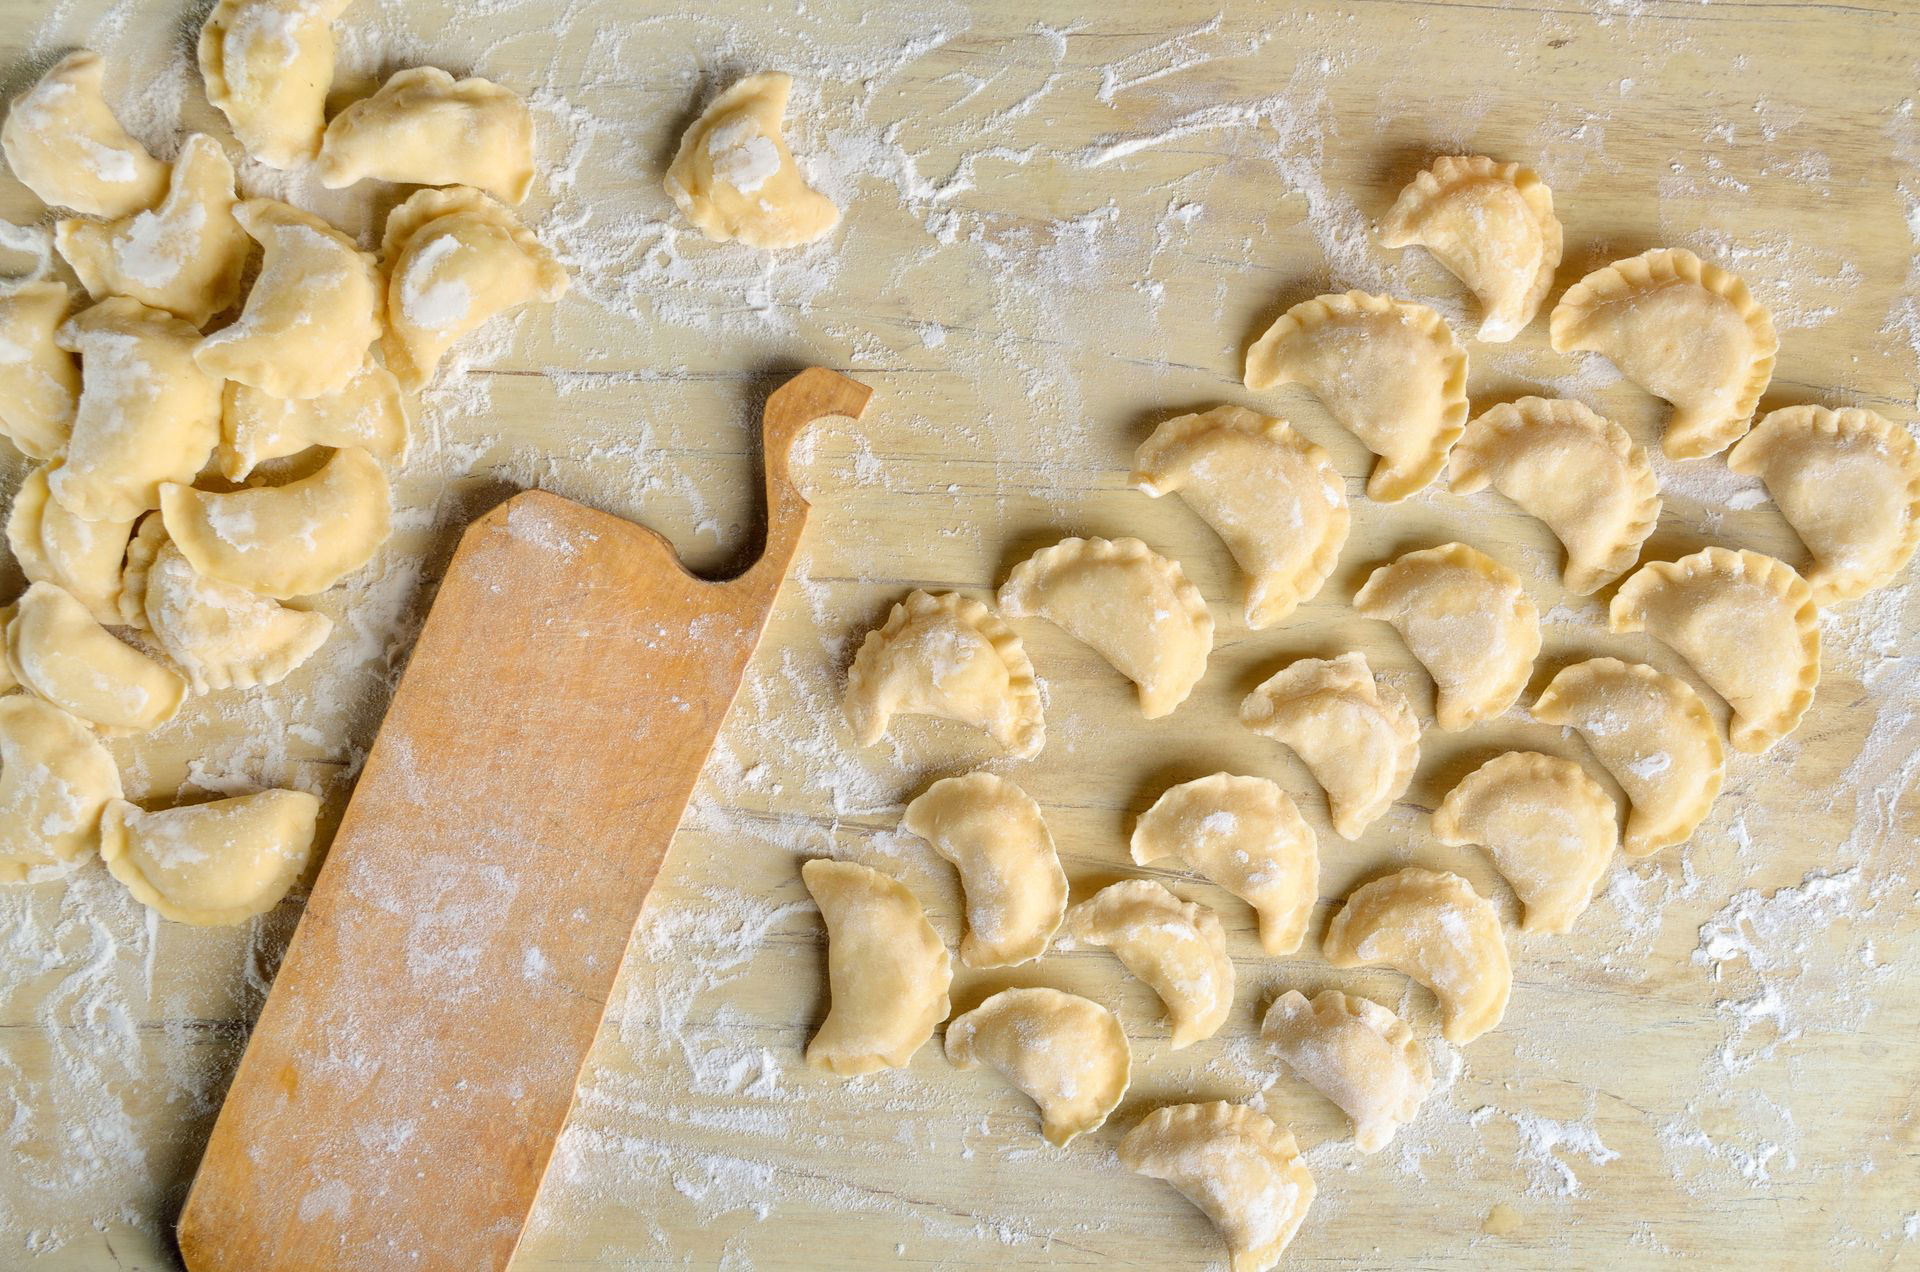 How to make the best dumplings? Here’s the best recipe